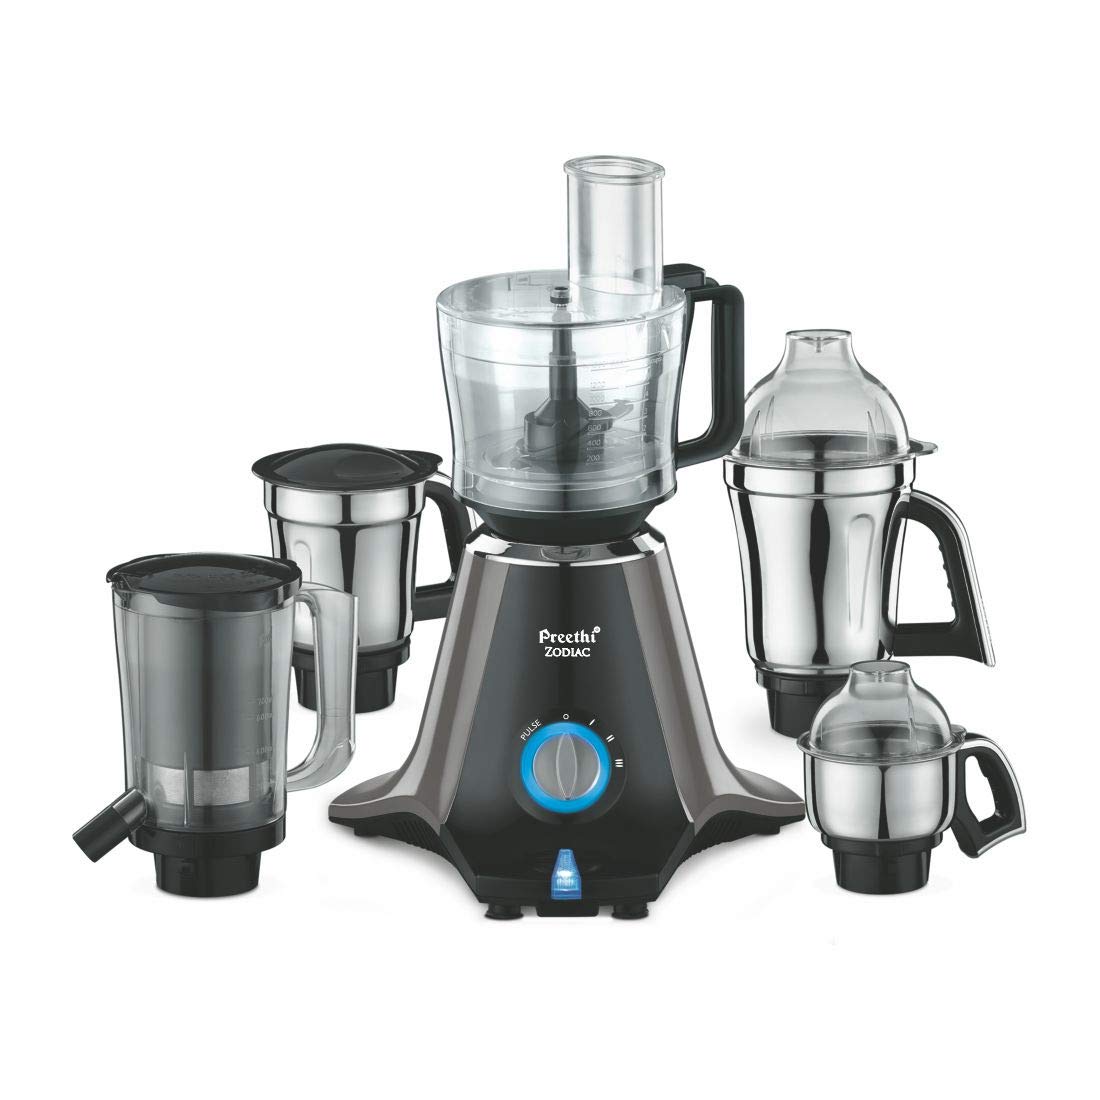 How Can Mixer Grinders Be Helpful For Indian Cooking?